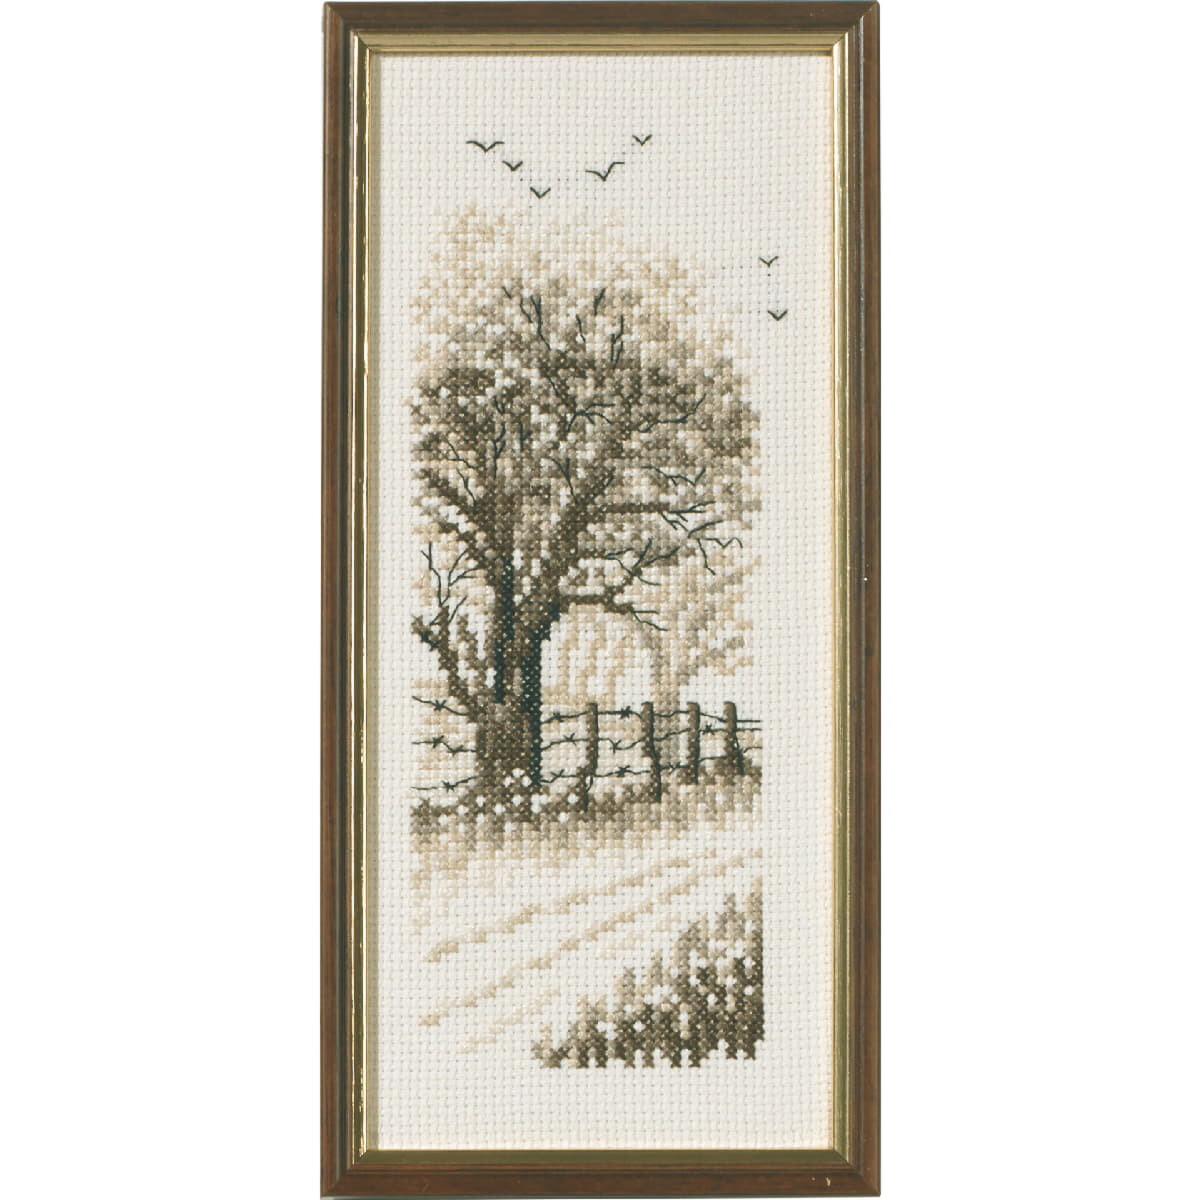 Permin counted cross stitch kit "Edge of the...